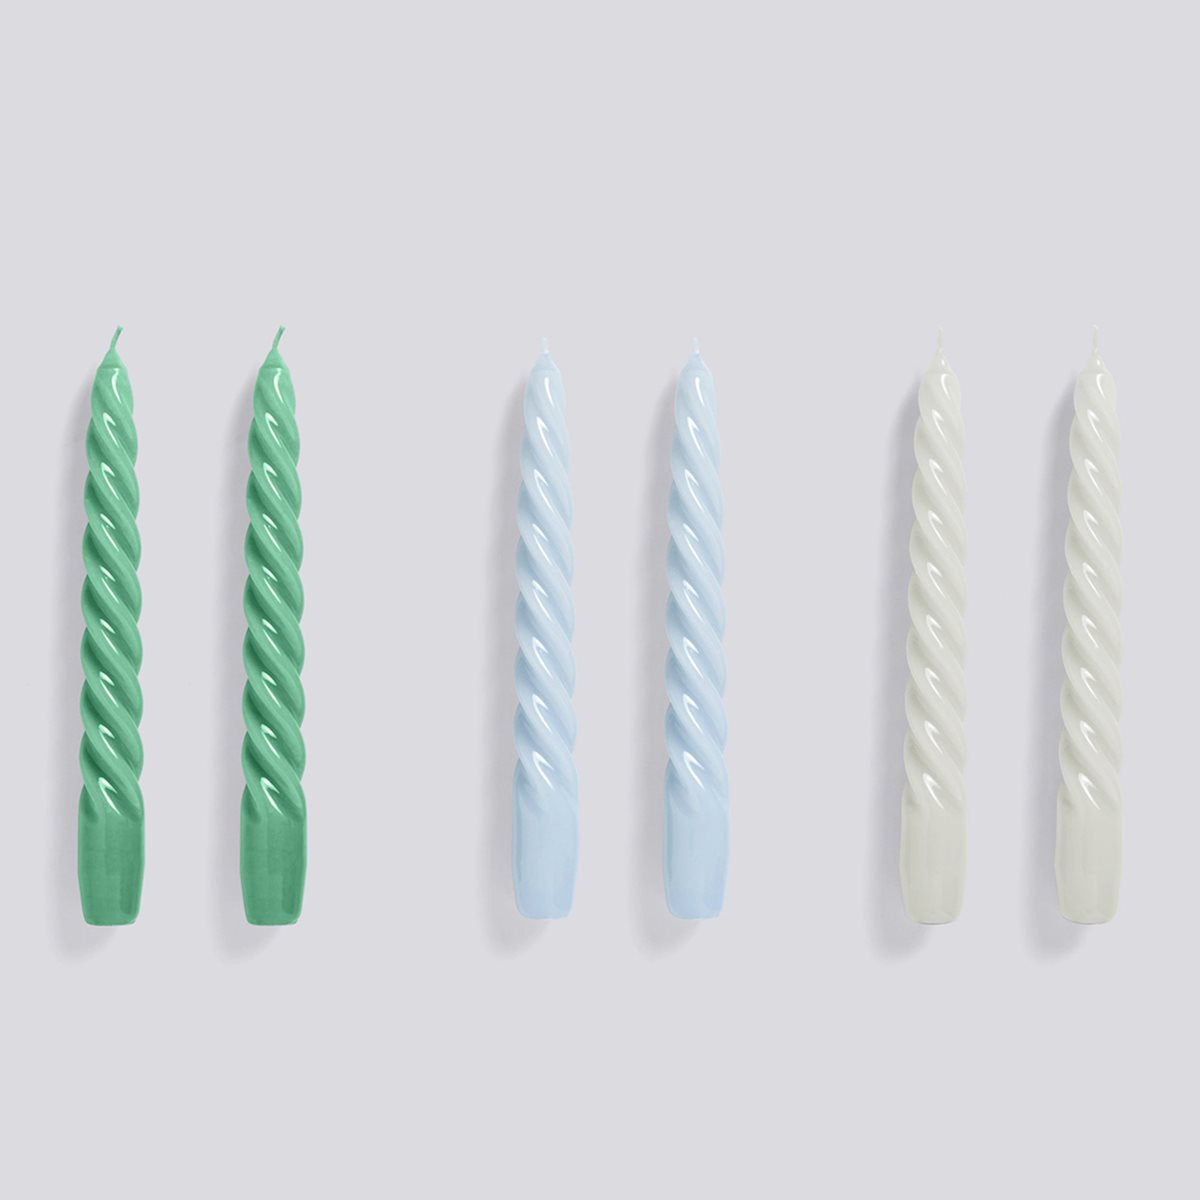 HAY Twisted Candles Set of 6 - Green/Light Blue/Light Grey